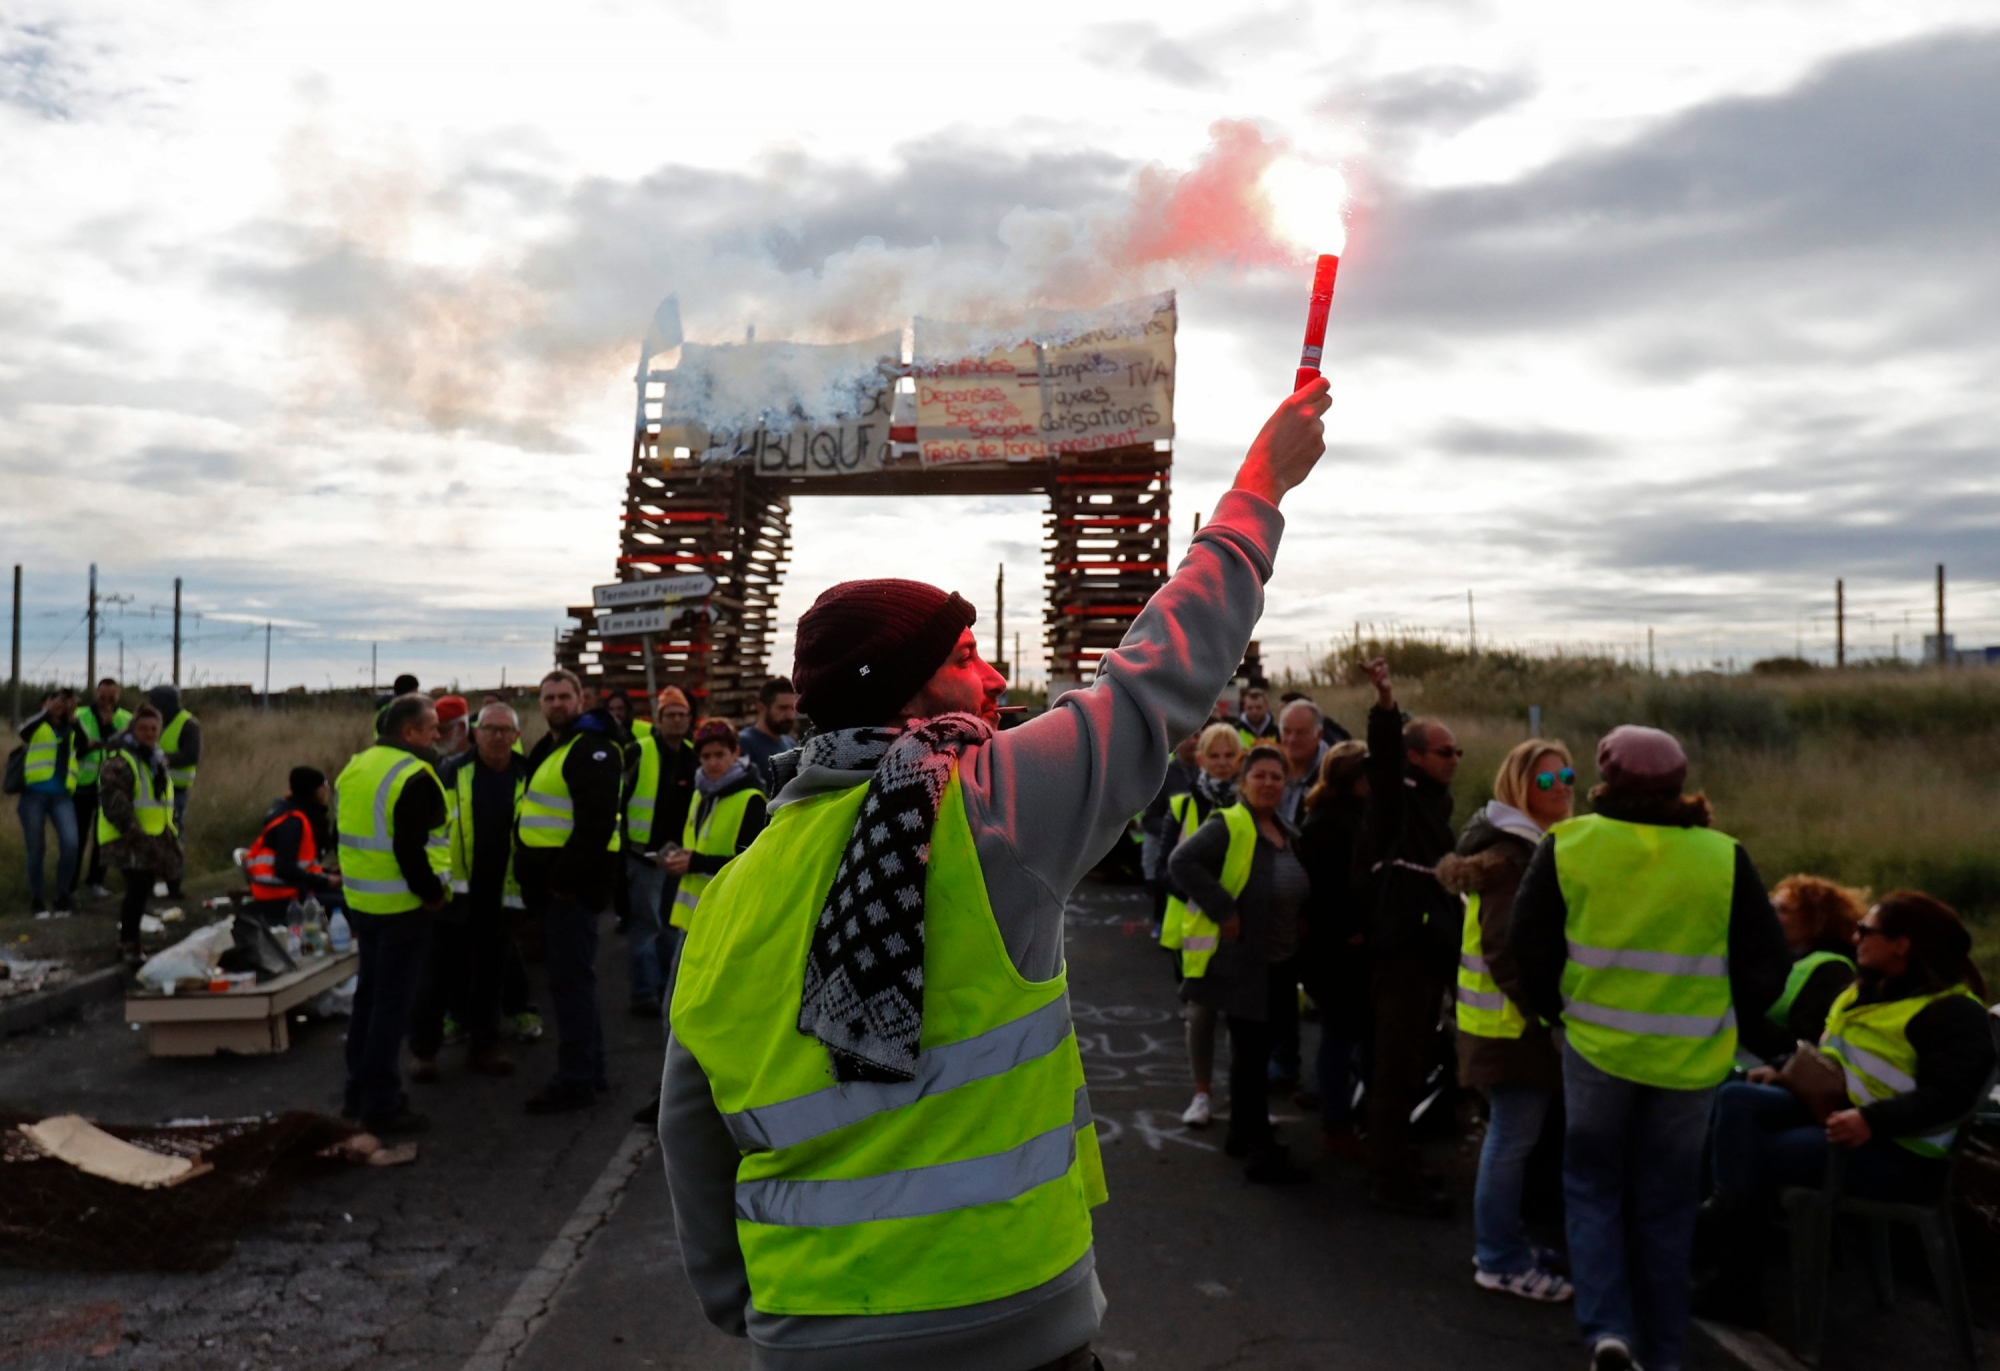 epa07205948 People wearing yellow vests block access to the oil refinery of Frontignan, southern France, 03 December 2018. The so-called gilets jaunes (yellow vests), a protest movement, which reportedly has no political affiliation, is protesting across the nation over high fuel prices.  EPA/GUILLAUME HORCAJUELO FRANCE FUEL TAXES PROTEST